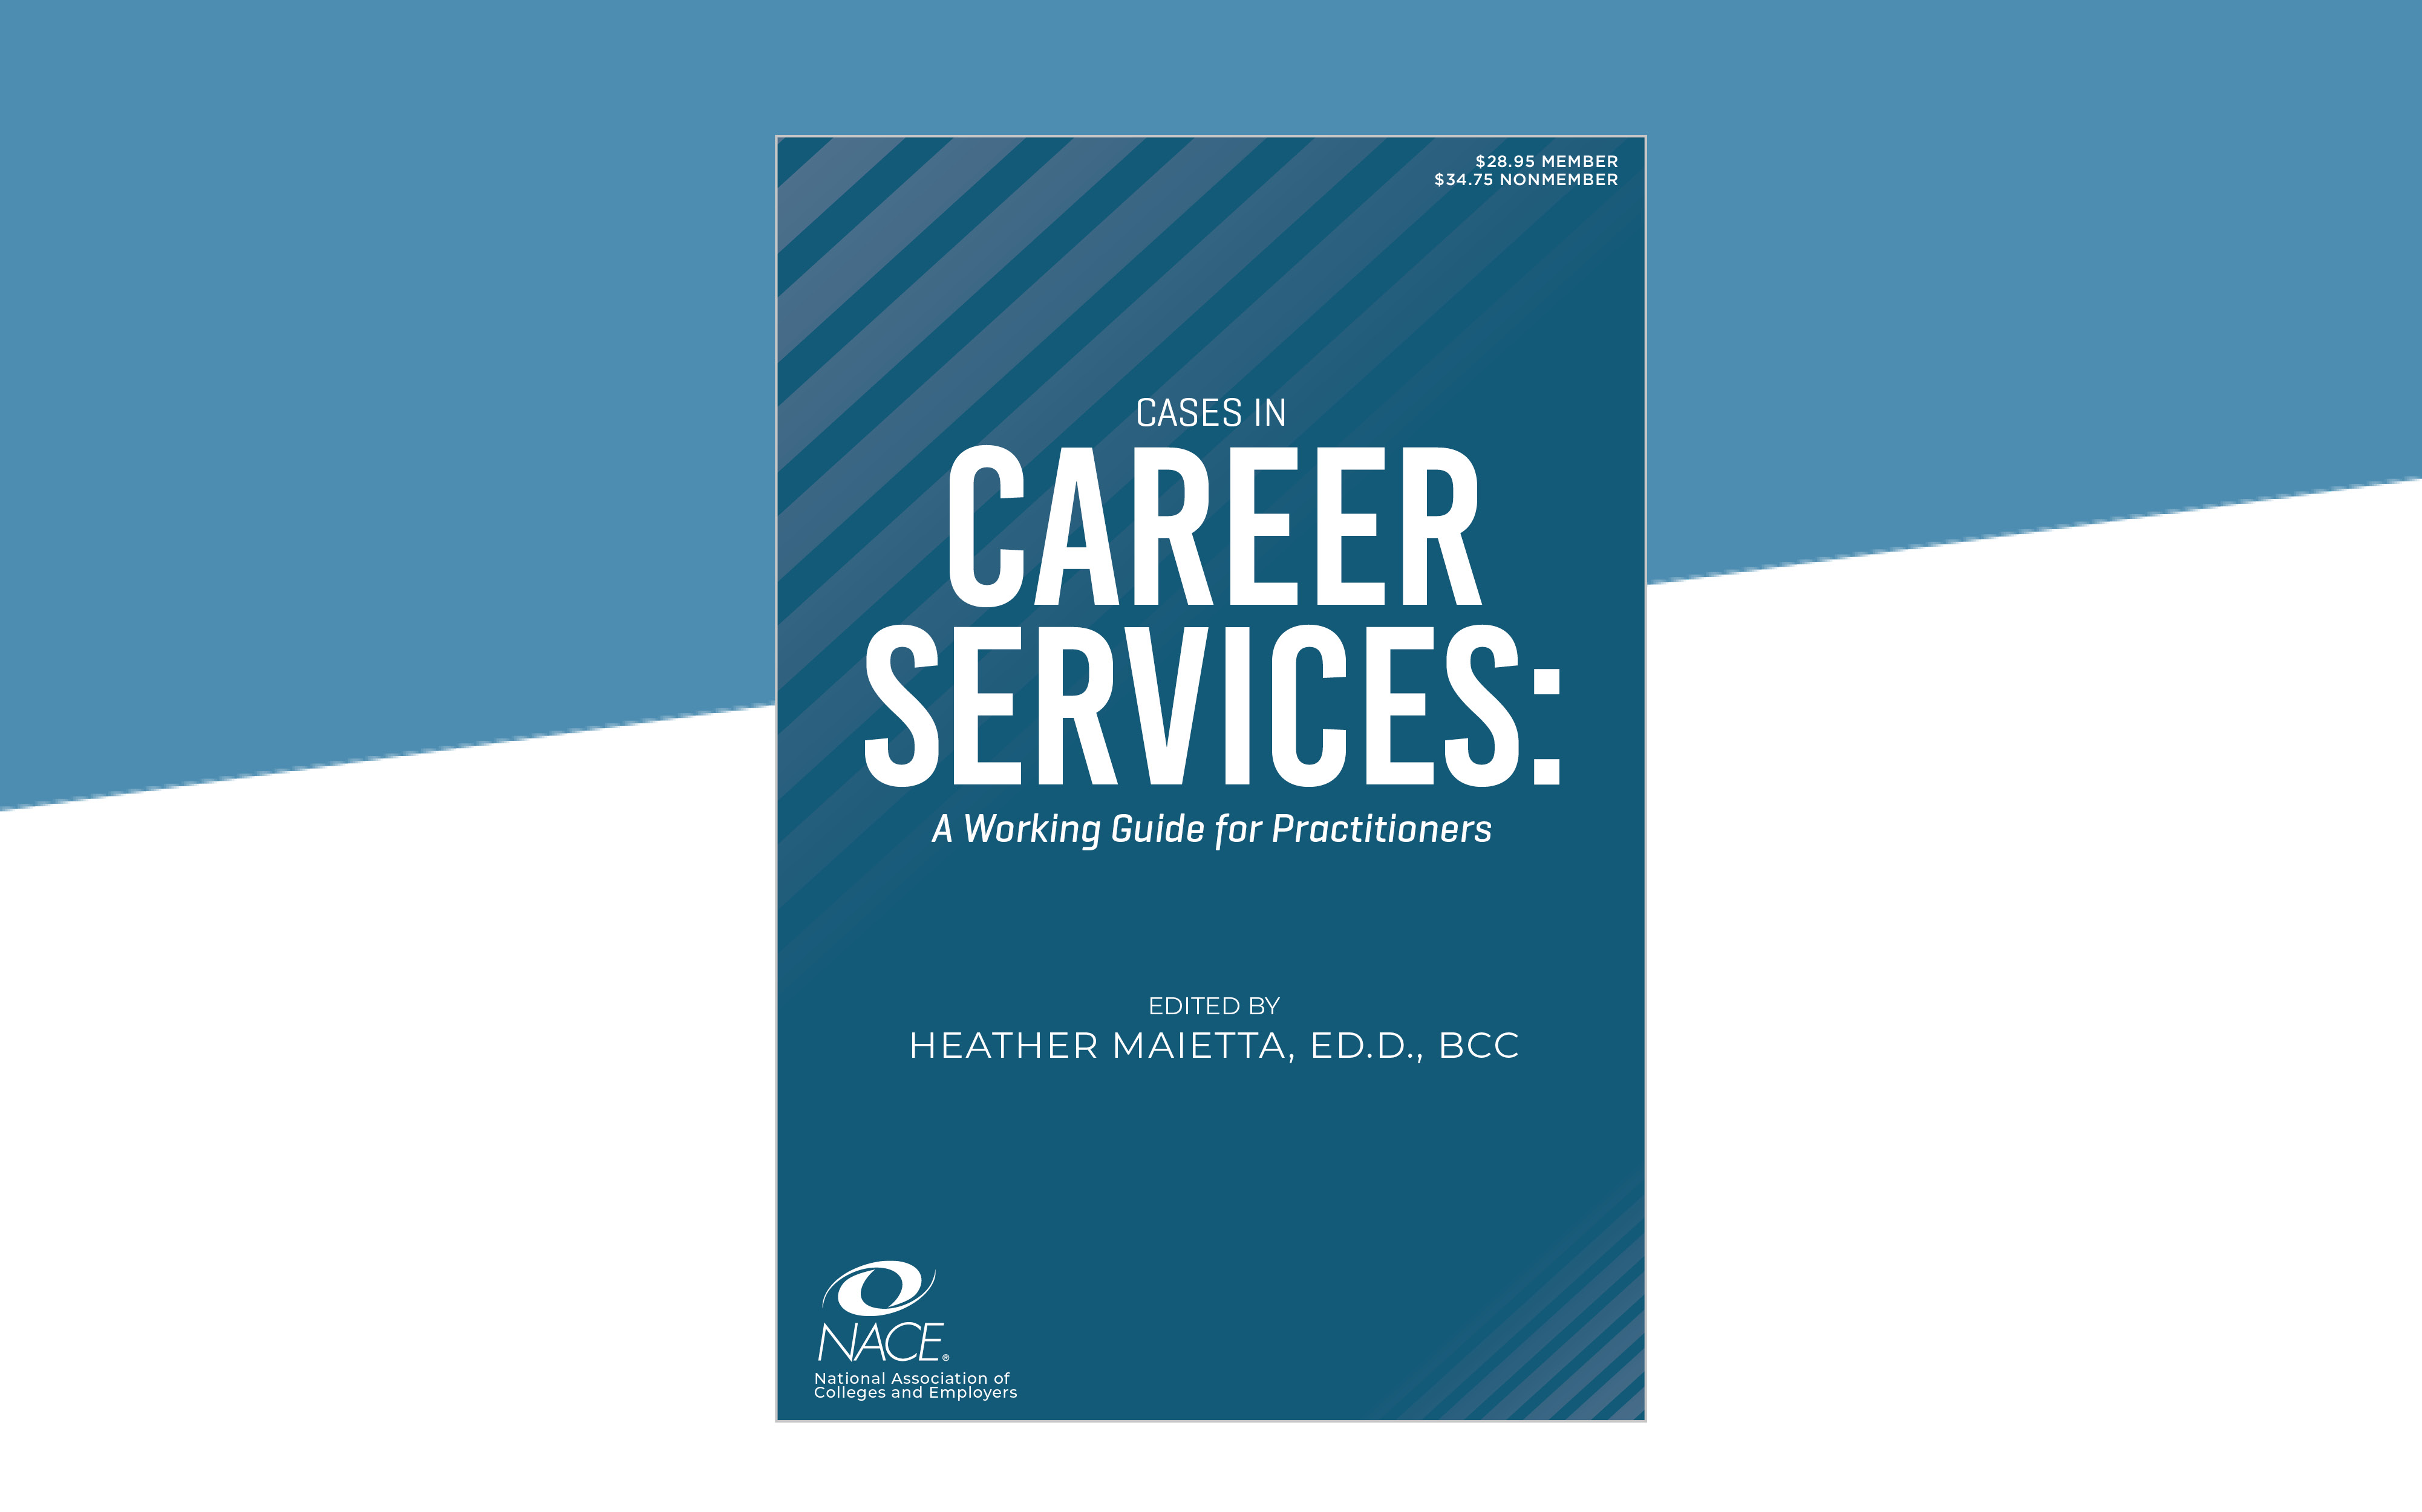 Cases in Career Services: A Working Guide for Practitioners